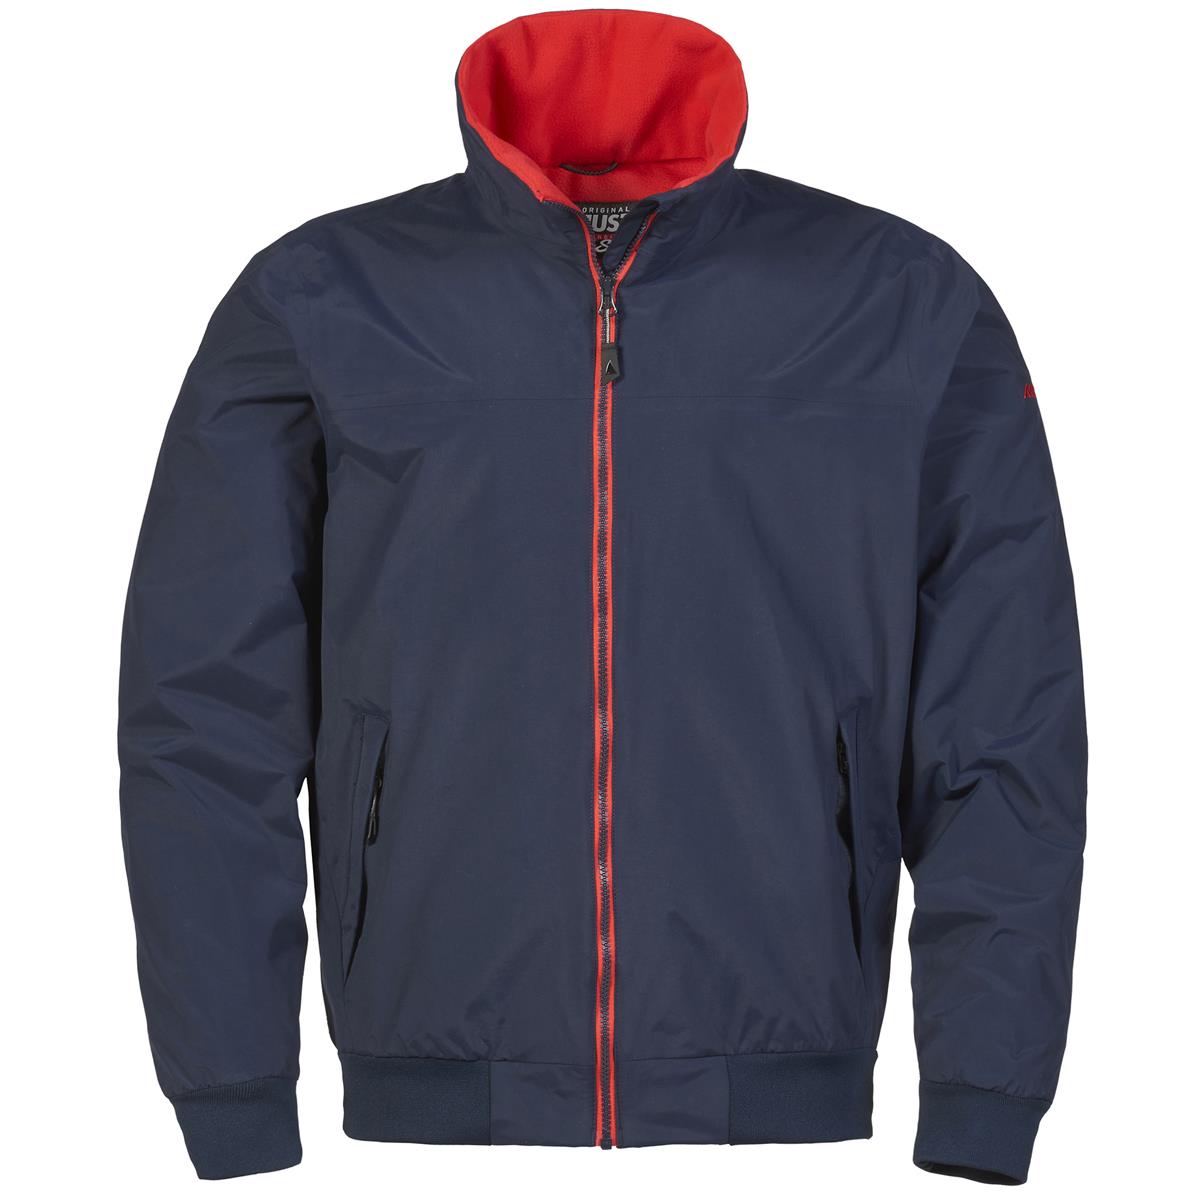 What protective features does the Musto Snug Blouson Jacket 2.0 have?